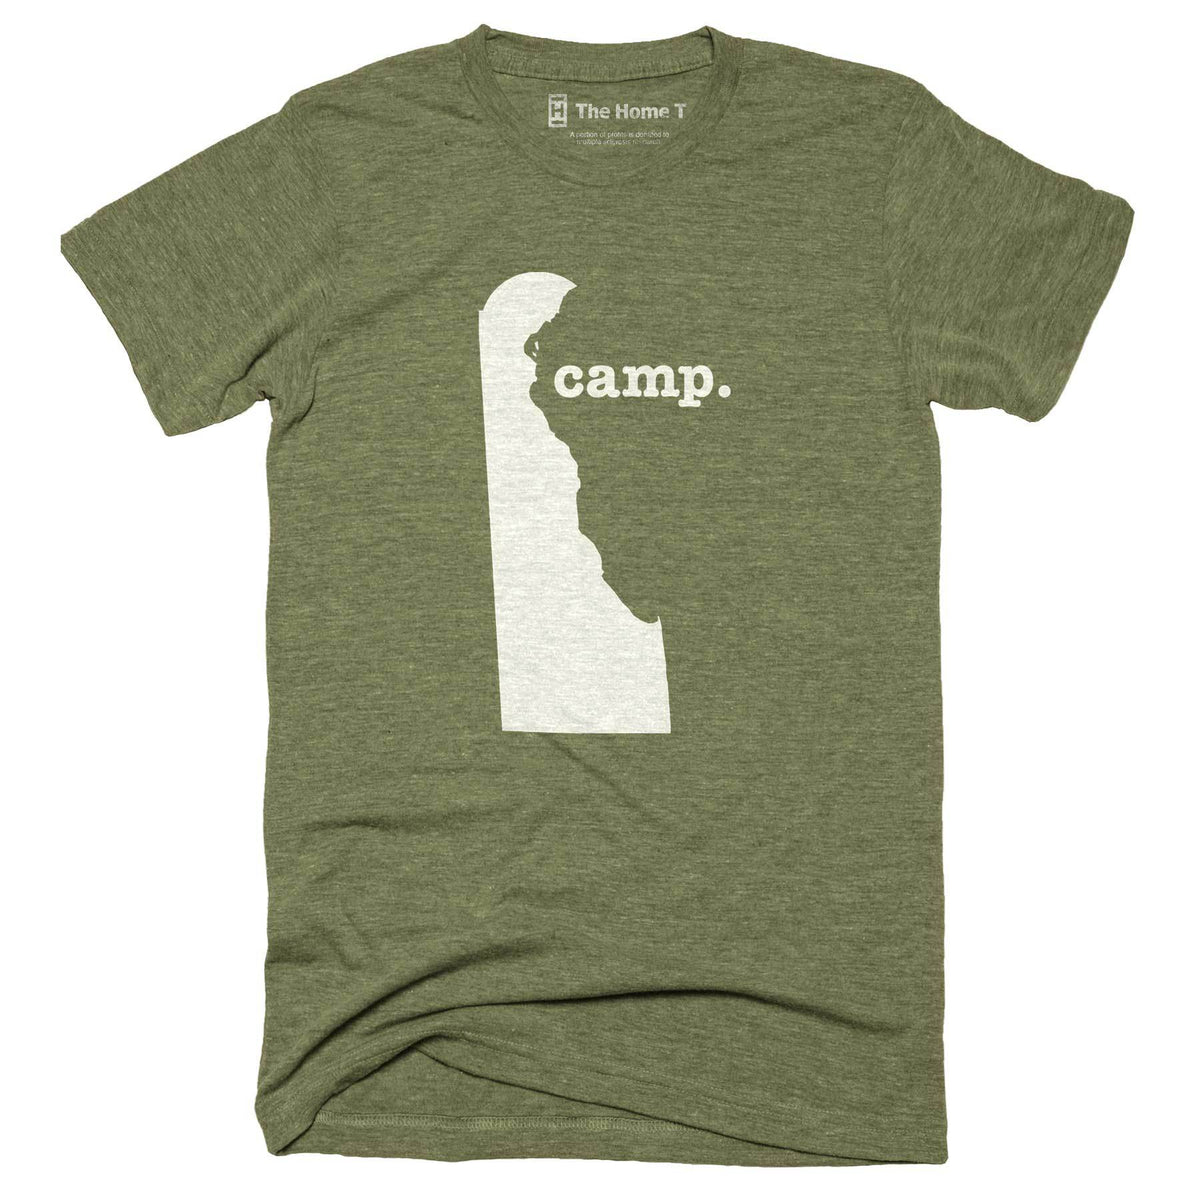 Delaware Camp Home T-Shirt Outdoor Collection The Home T XXL Army Green